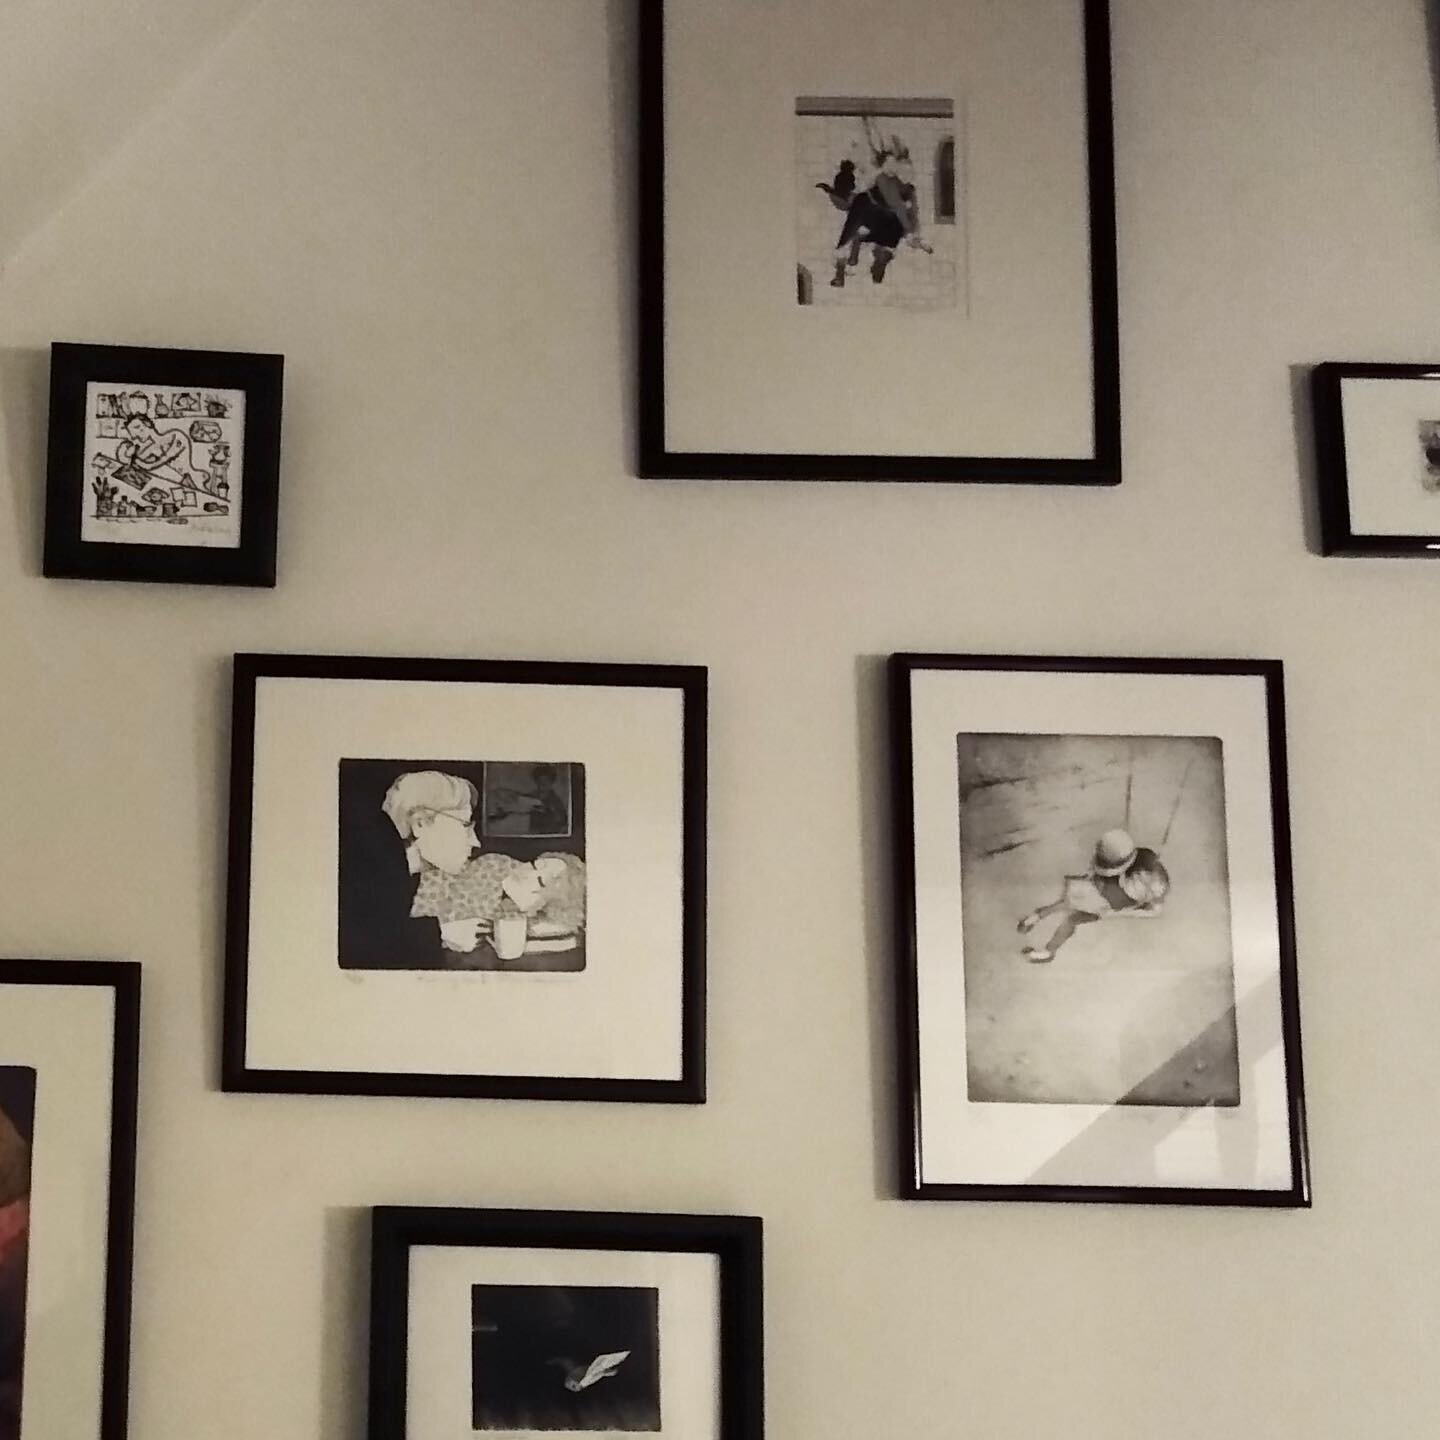 Always lovely to see my prints in their homes... &lsquo;Girl on Swing&rsquo; is in good company next to works by #franswesselman and #jillmurphy in this photo sent recently by a collector. Love the theme and feel of the stairwell gallery of black and